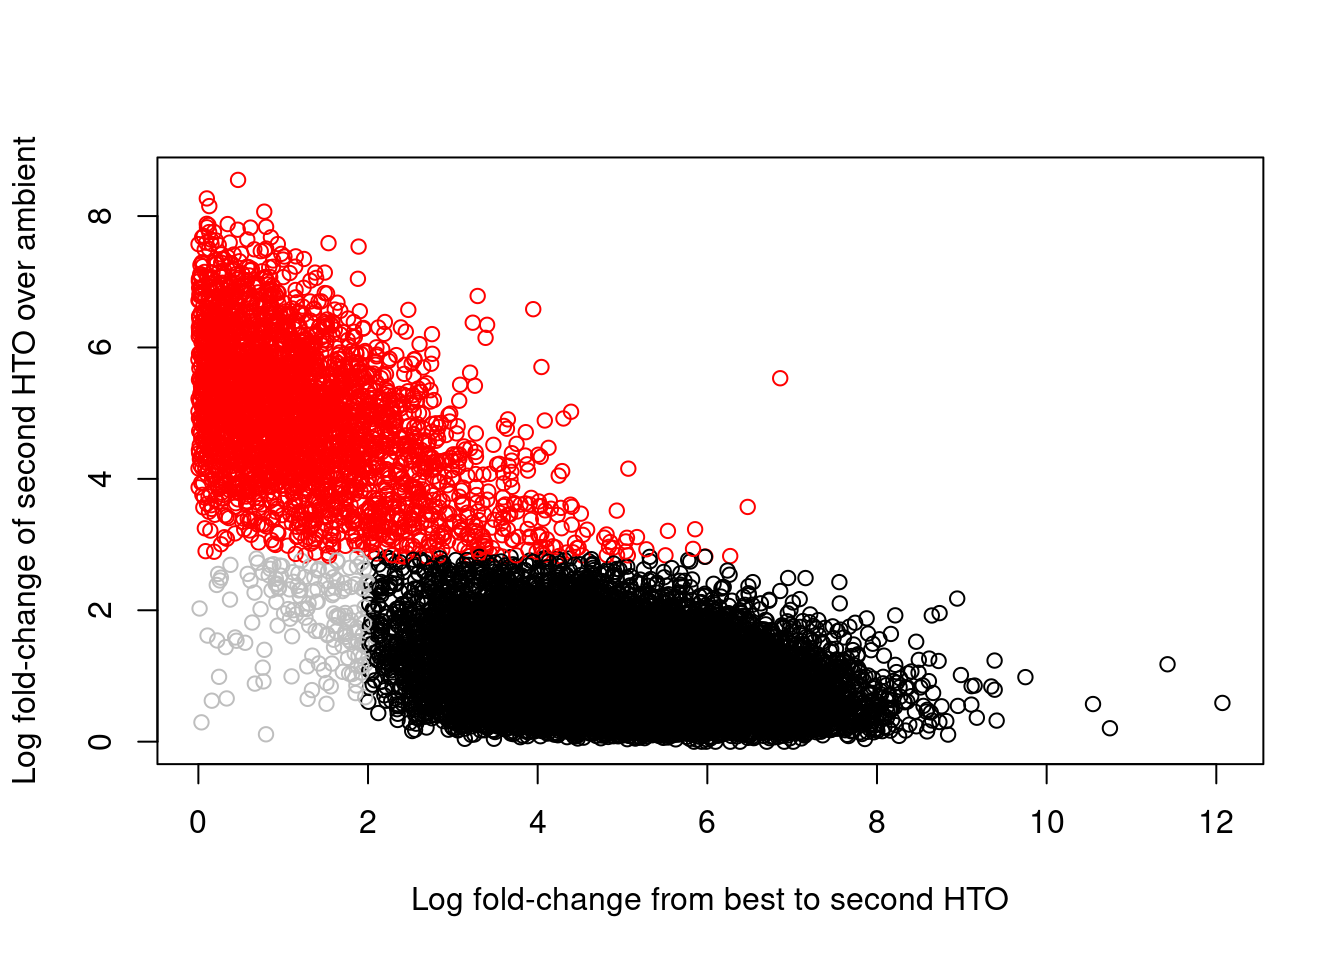 Log-fold change of the second-most abundant HTO over ambient contamination, compared to the log-fold change of the first HTO over the second HTO. Each point represents a cell where potential doublets are shown in red while confidently assigned singlets are shown in black.